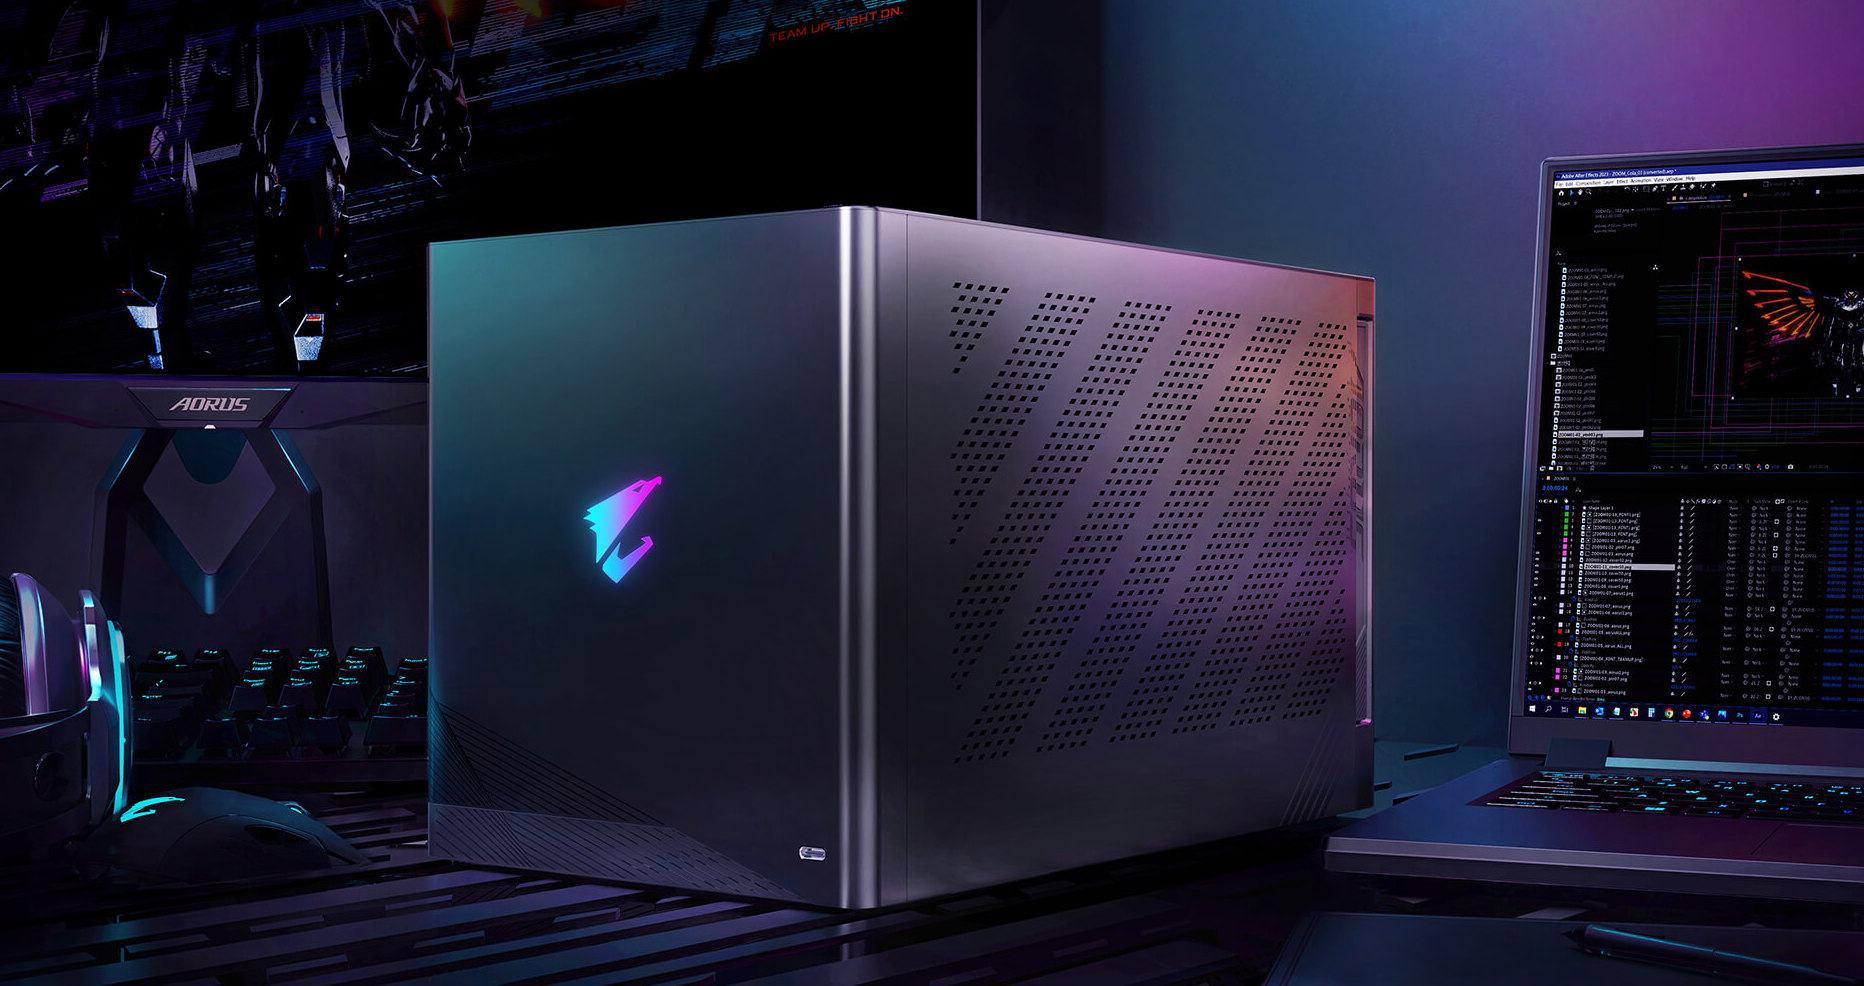  Gigabyte's RTX 4090 Gaming Box wants to turn your ultrabook into an absolute monster of a gaming PC 